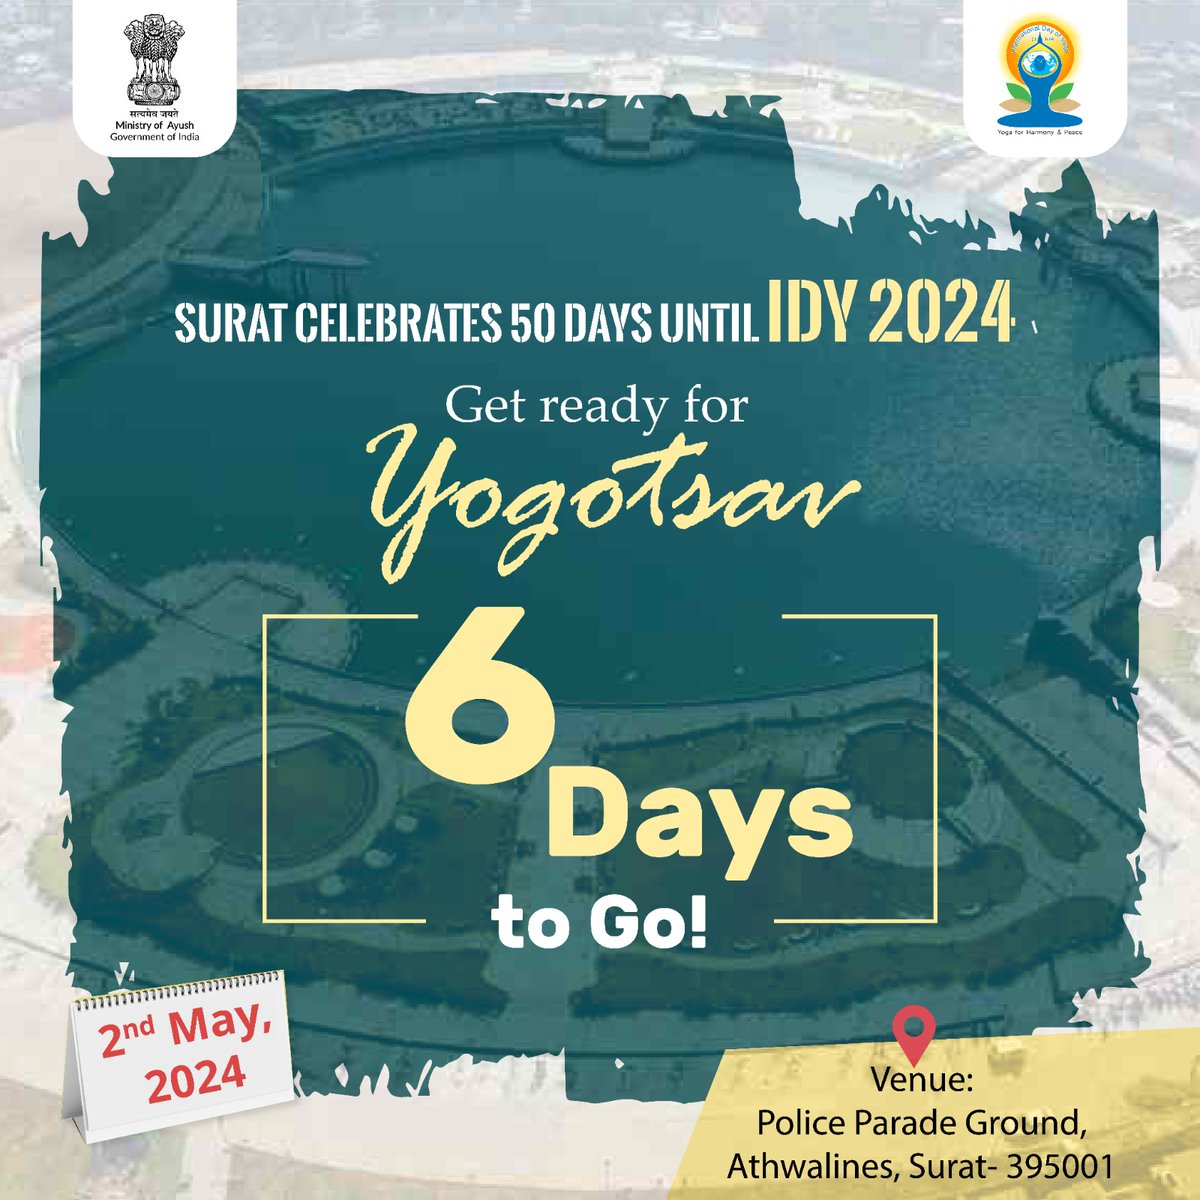 Surat is gearing up to celebrate the countdown to the #InternationalDayOfYoga with great enthusiasm! As the city marks 50 days until the big day, preparations are underway for the mega #Yogotsav. With just 6 days to go, the event promises to be a grand celebration of yoga.